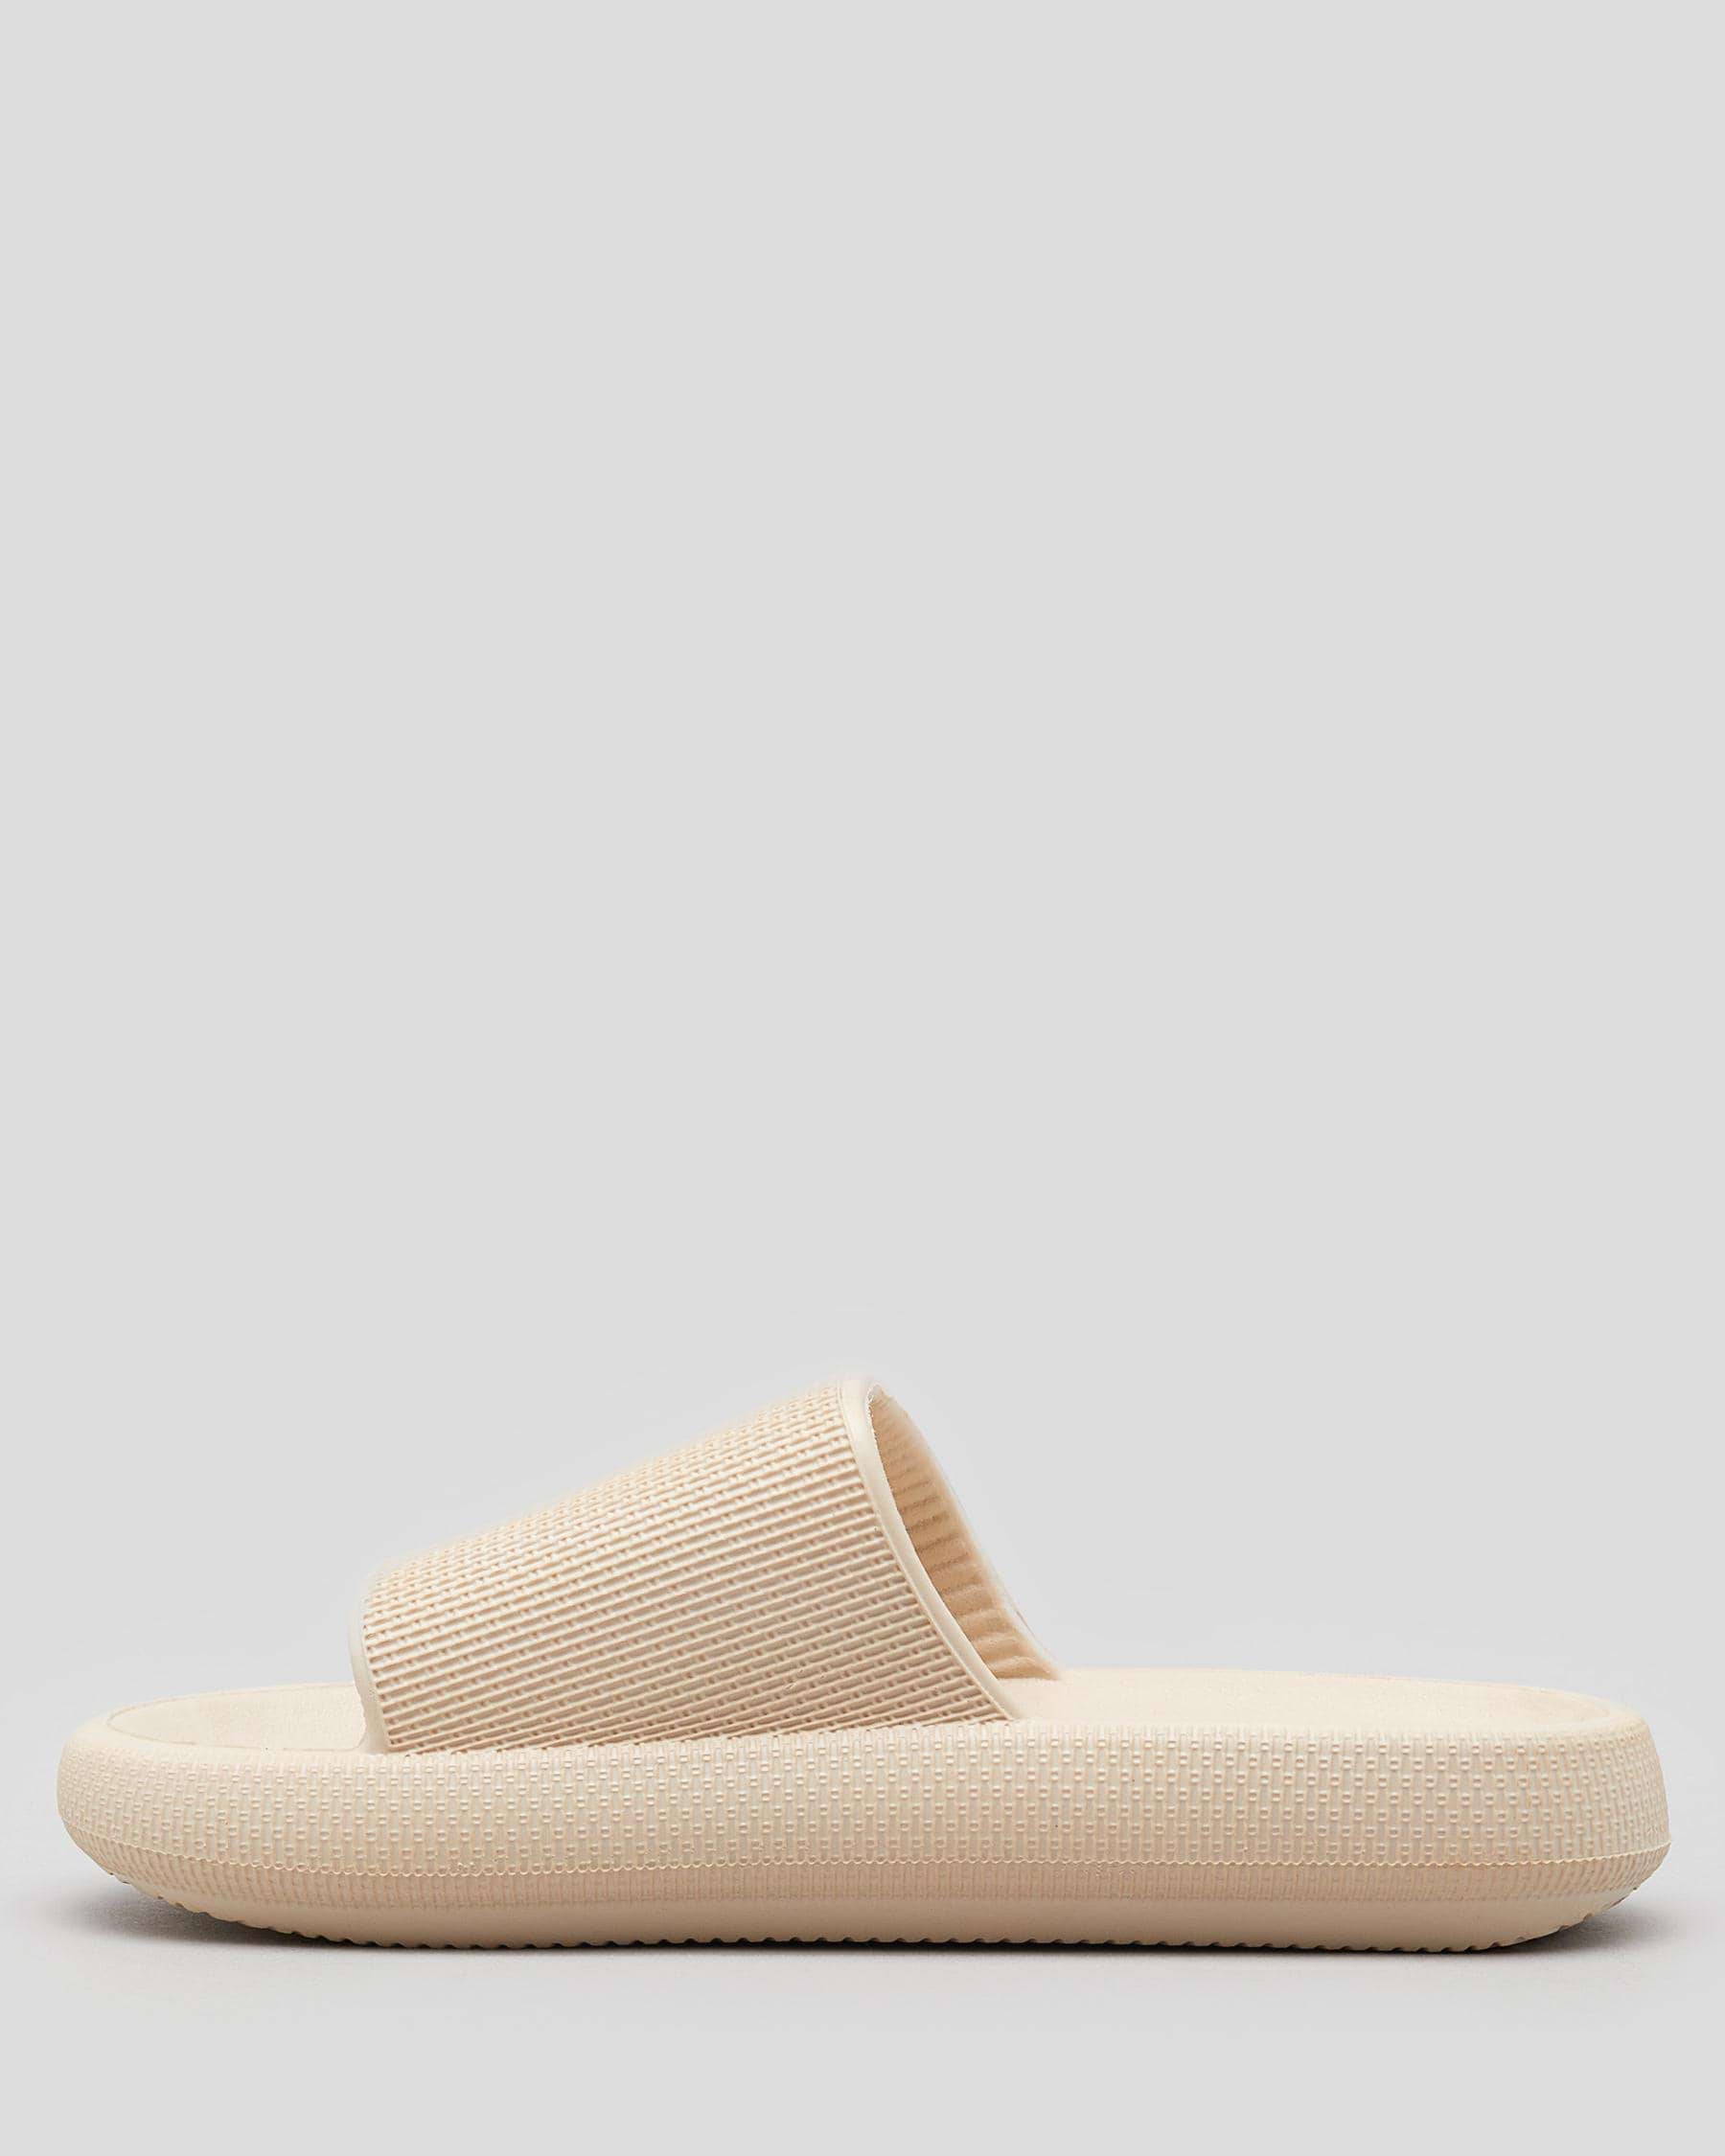 Ava And Ever Summer Slide Sandals In Cream - Fast Shipping & Easy ...